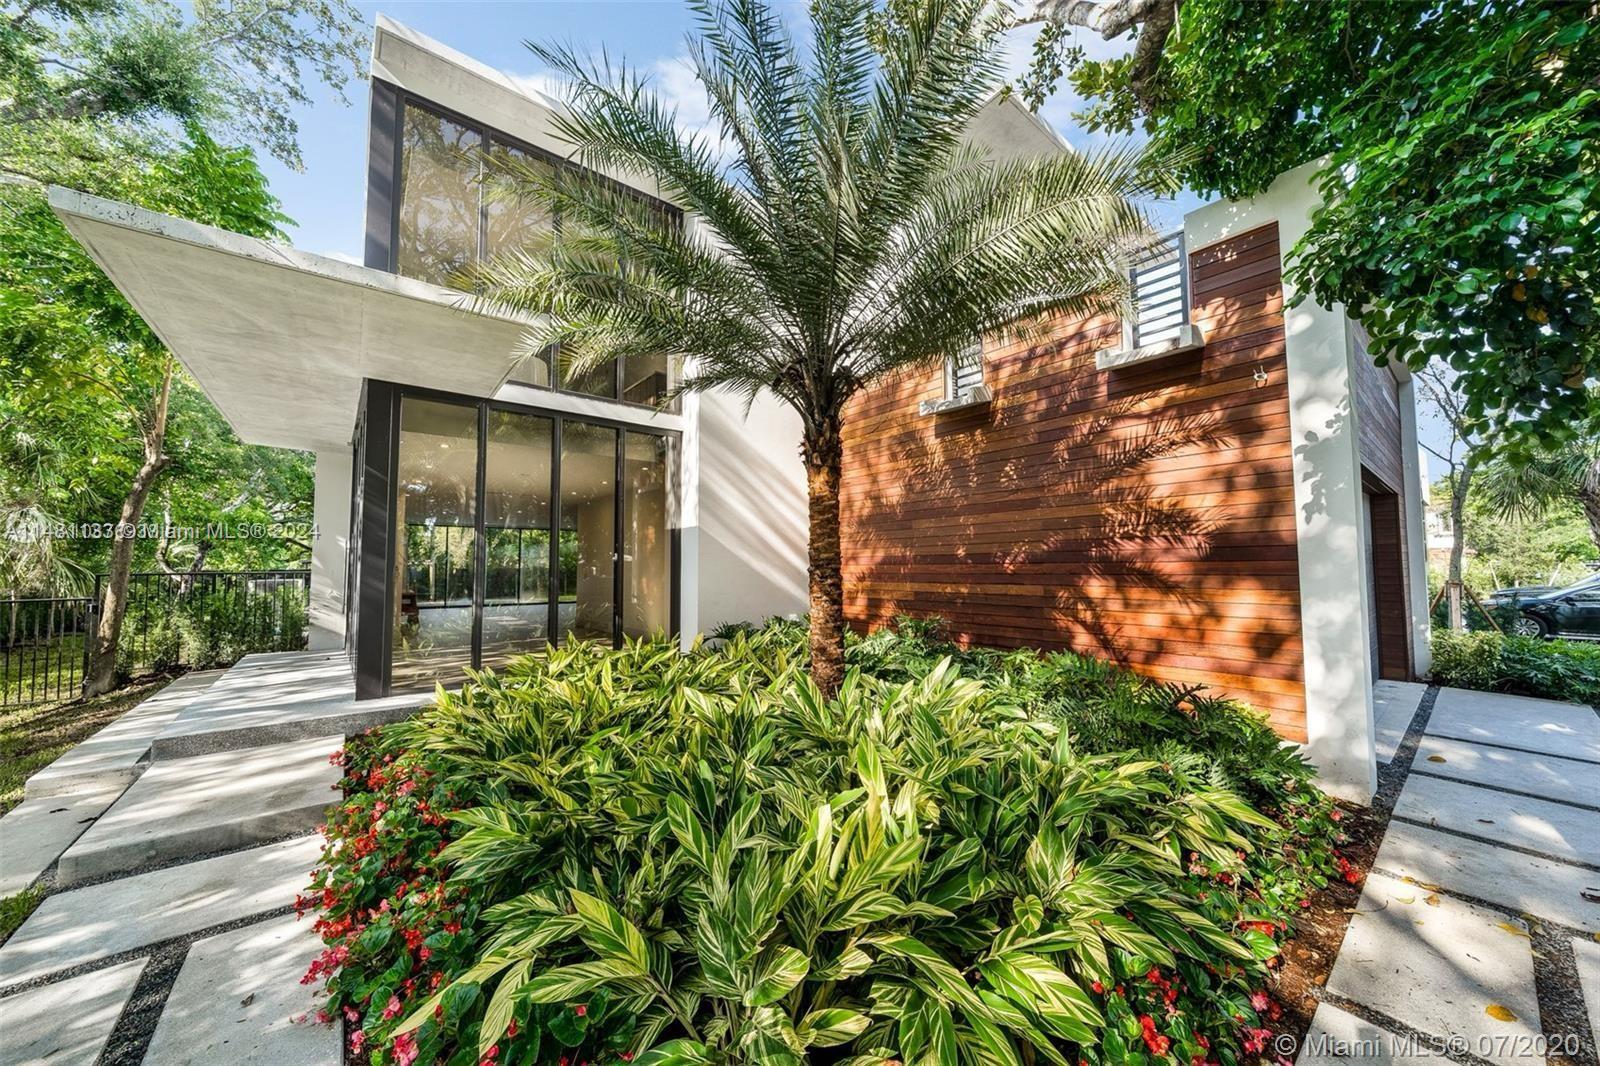 This 4,123 s/f home is meticulously landscaped and includes an impressive oak tree that  welcomes you at your entrance. The home is bright and serene with floor to ceiling windows throughout. An open floor plan seamlessly connects the foyer, dining , sitting room and  eat in kitchen which then leads you to the inviting  sunny backyard with a heated pool and two custom built pergolas ready for entertaining including a  built in grill, and refrigerator. Meticulous attention to detail is presented in the kitchen with new quartz countertops, customized backsplash, freshly finished cabinets, and brand-name appliances. A true sanctuary with impeccable attention to detail.